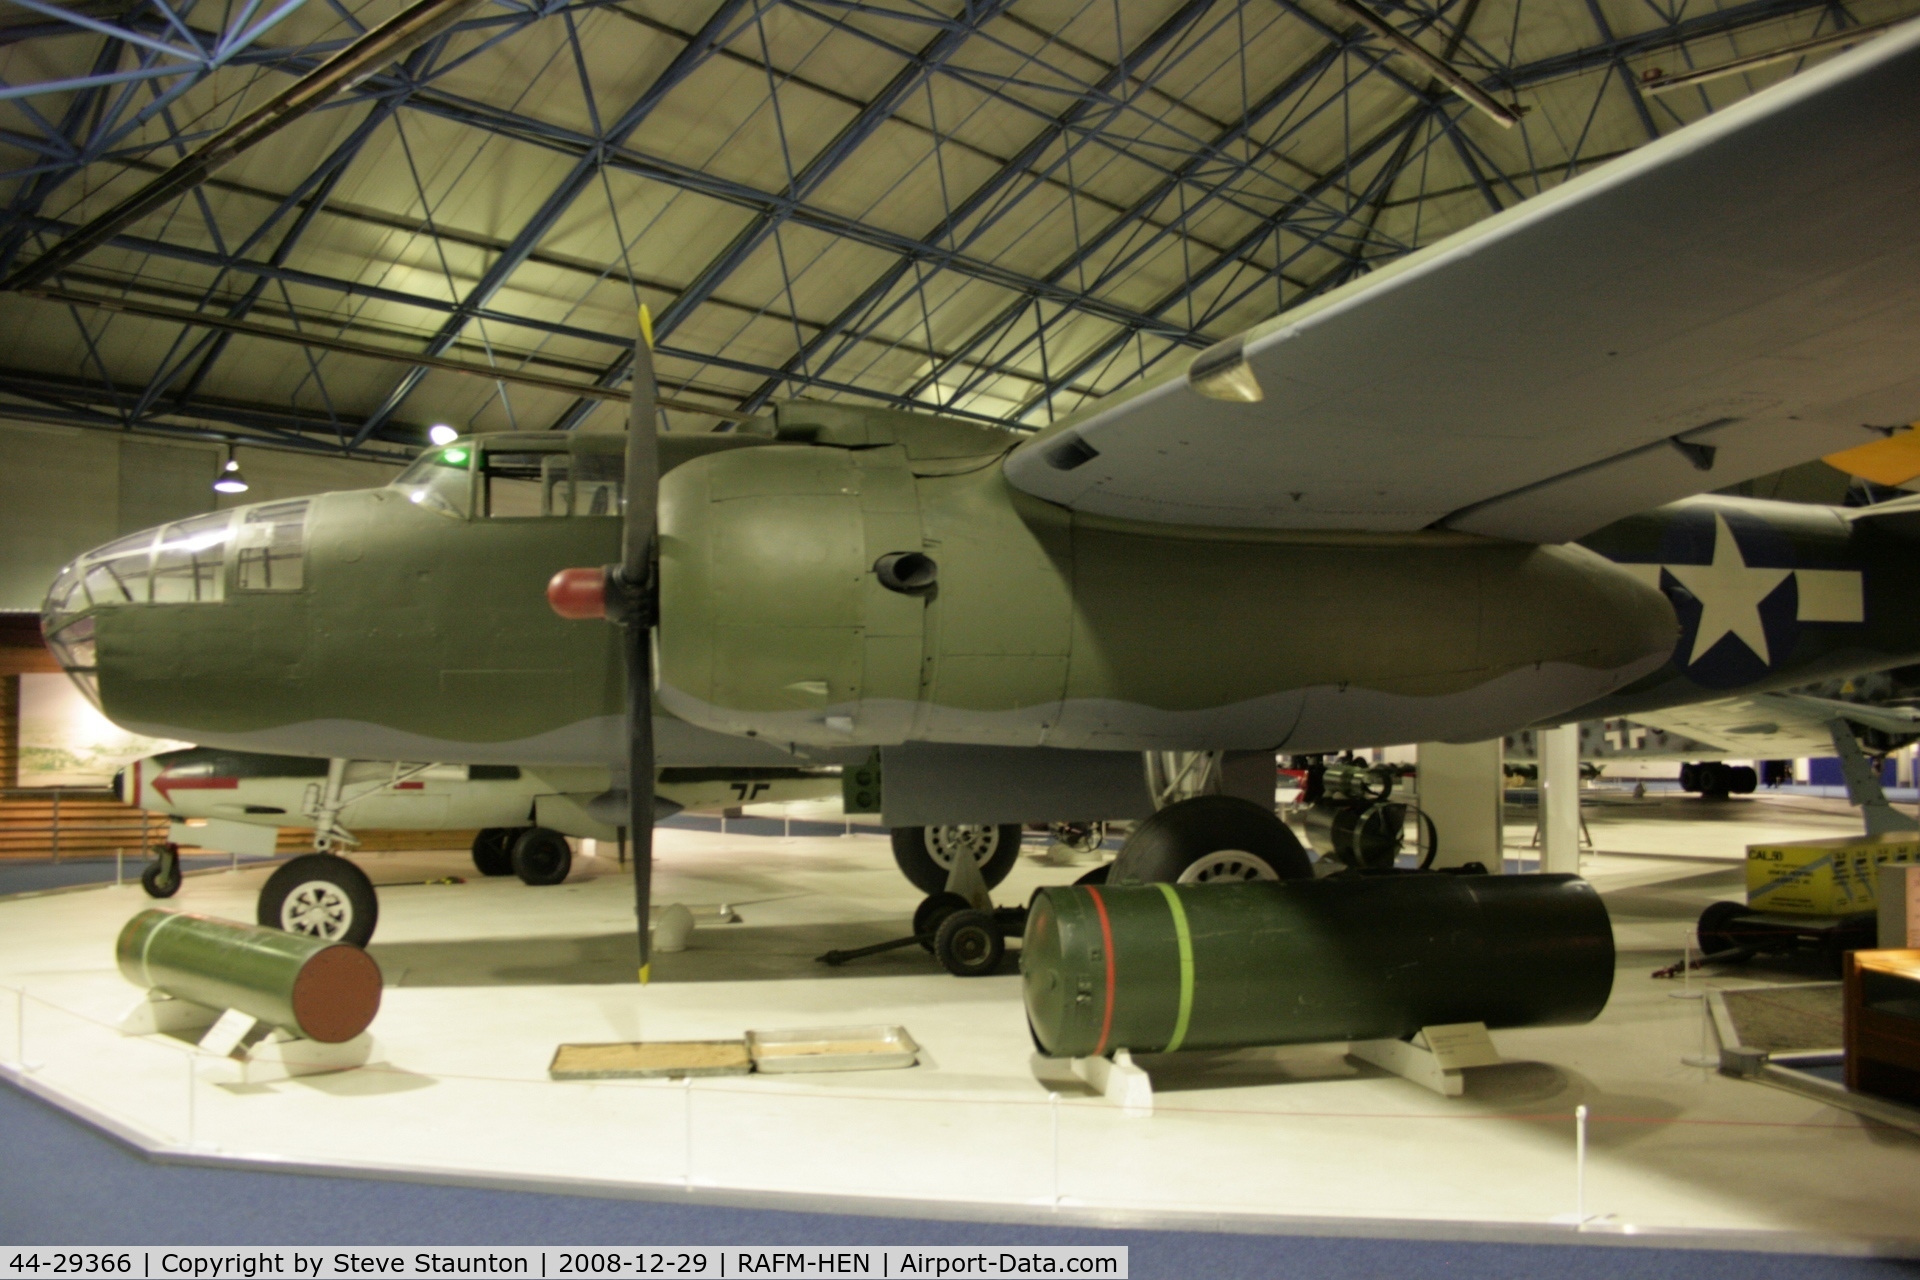 44-29366, North American TB-25N Mitchell C/N 108-32461, Taken at the RAF Museum, Hendon. December 2008